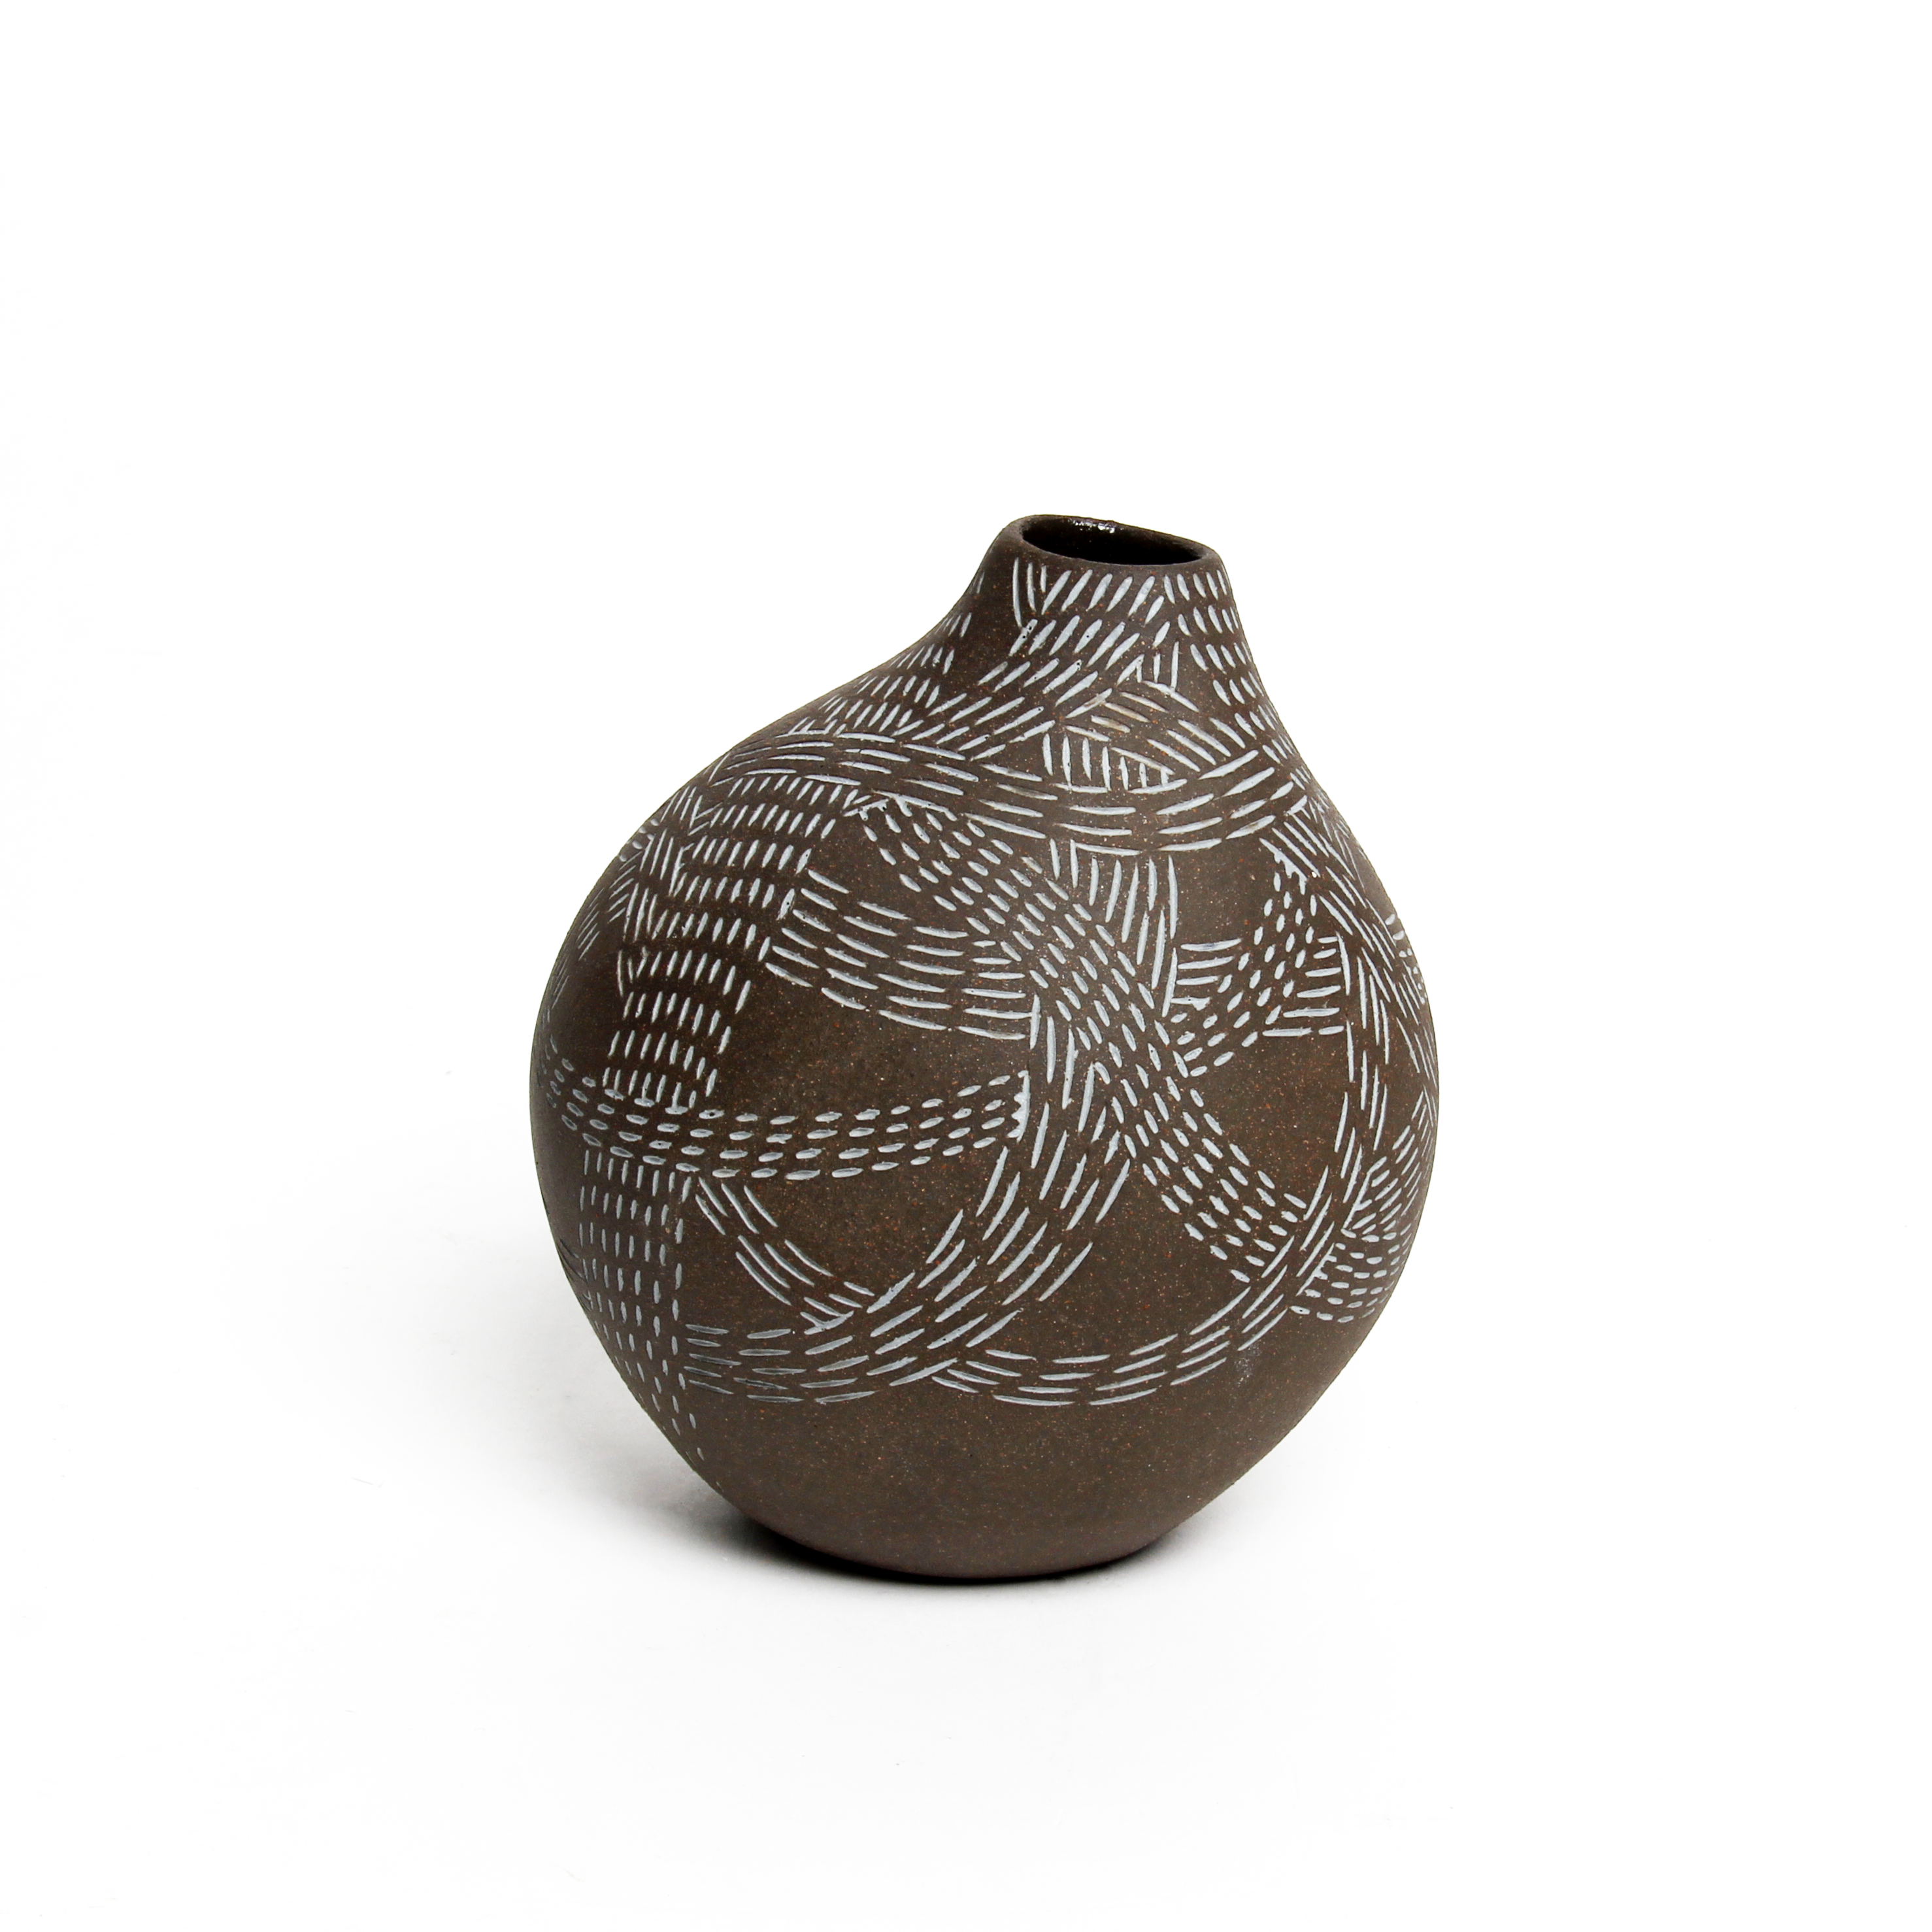 Talia Silva: Small Black and Blue Inlay Vessel (Each sold separately) Product Image 4 of 5